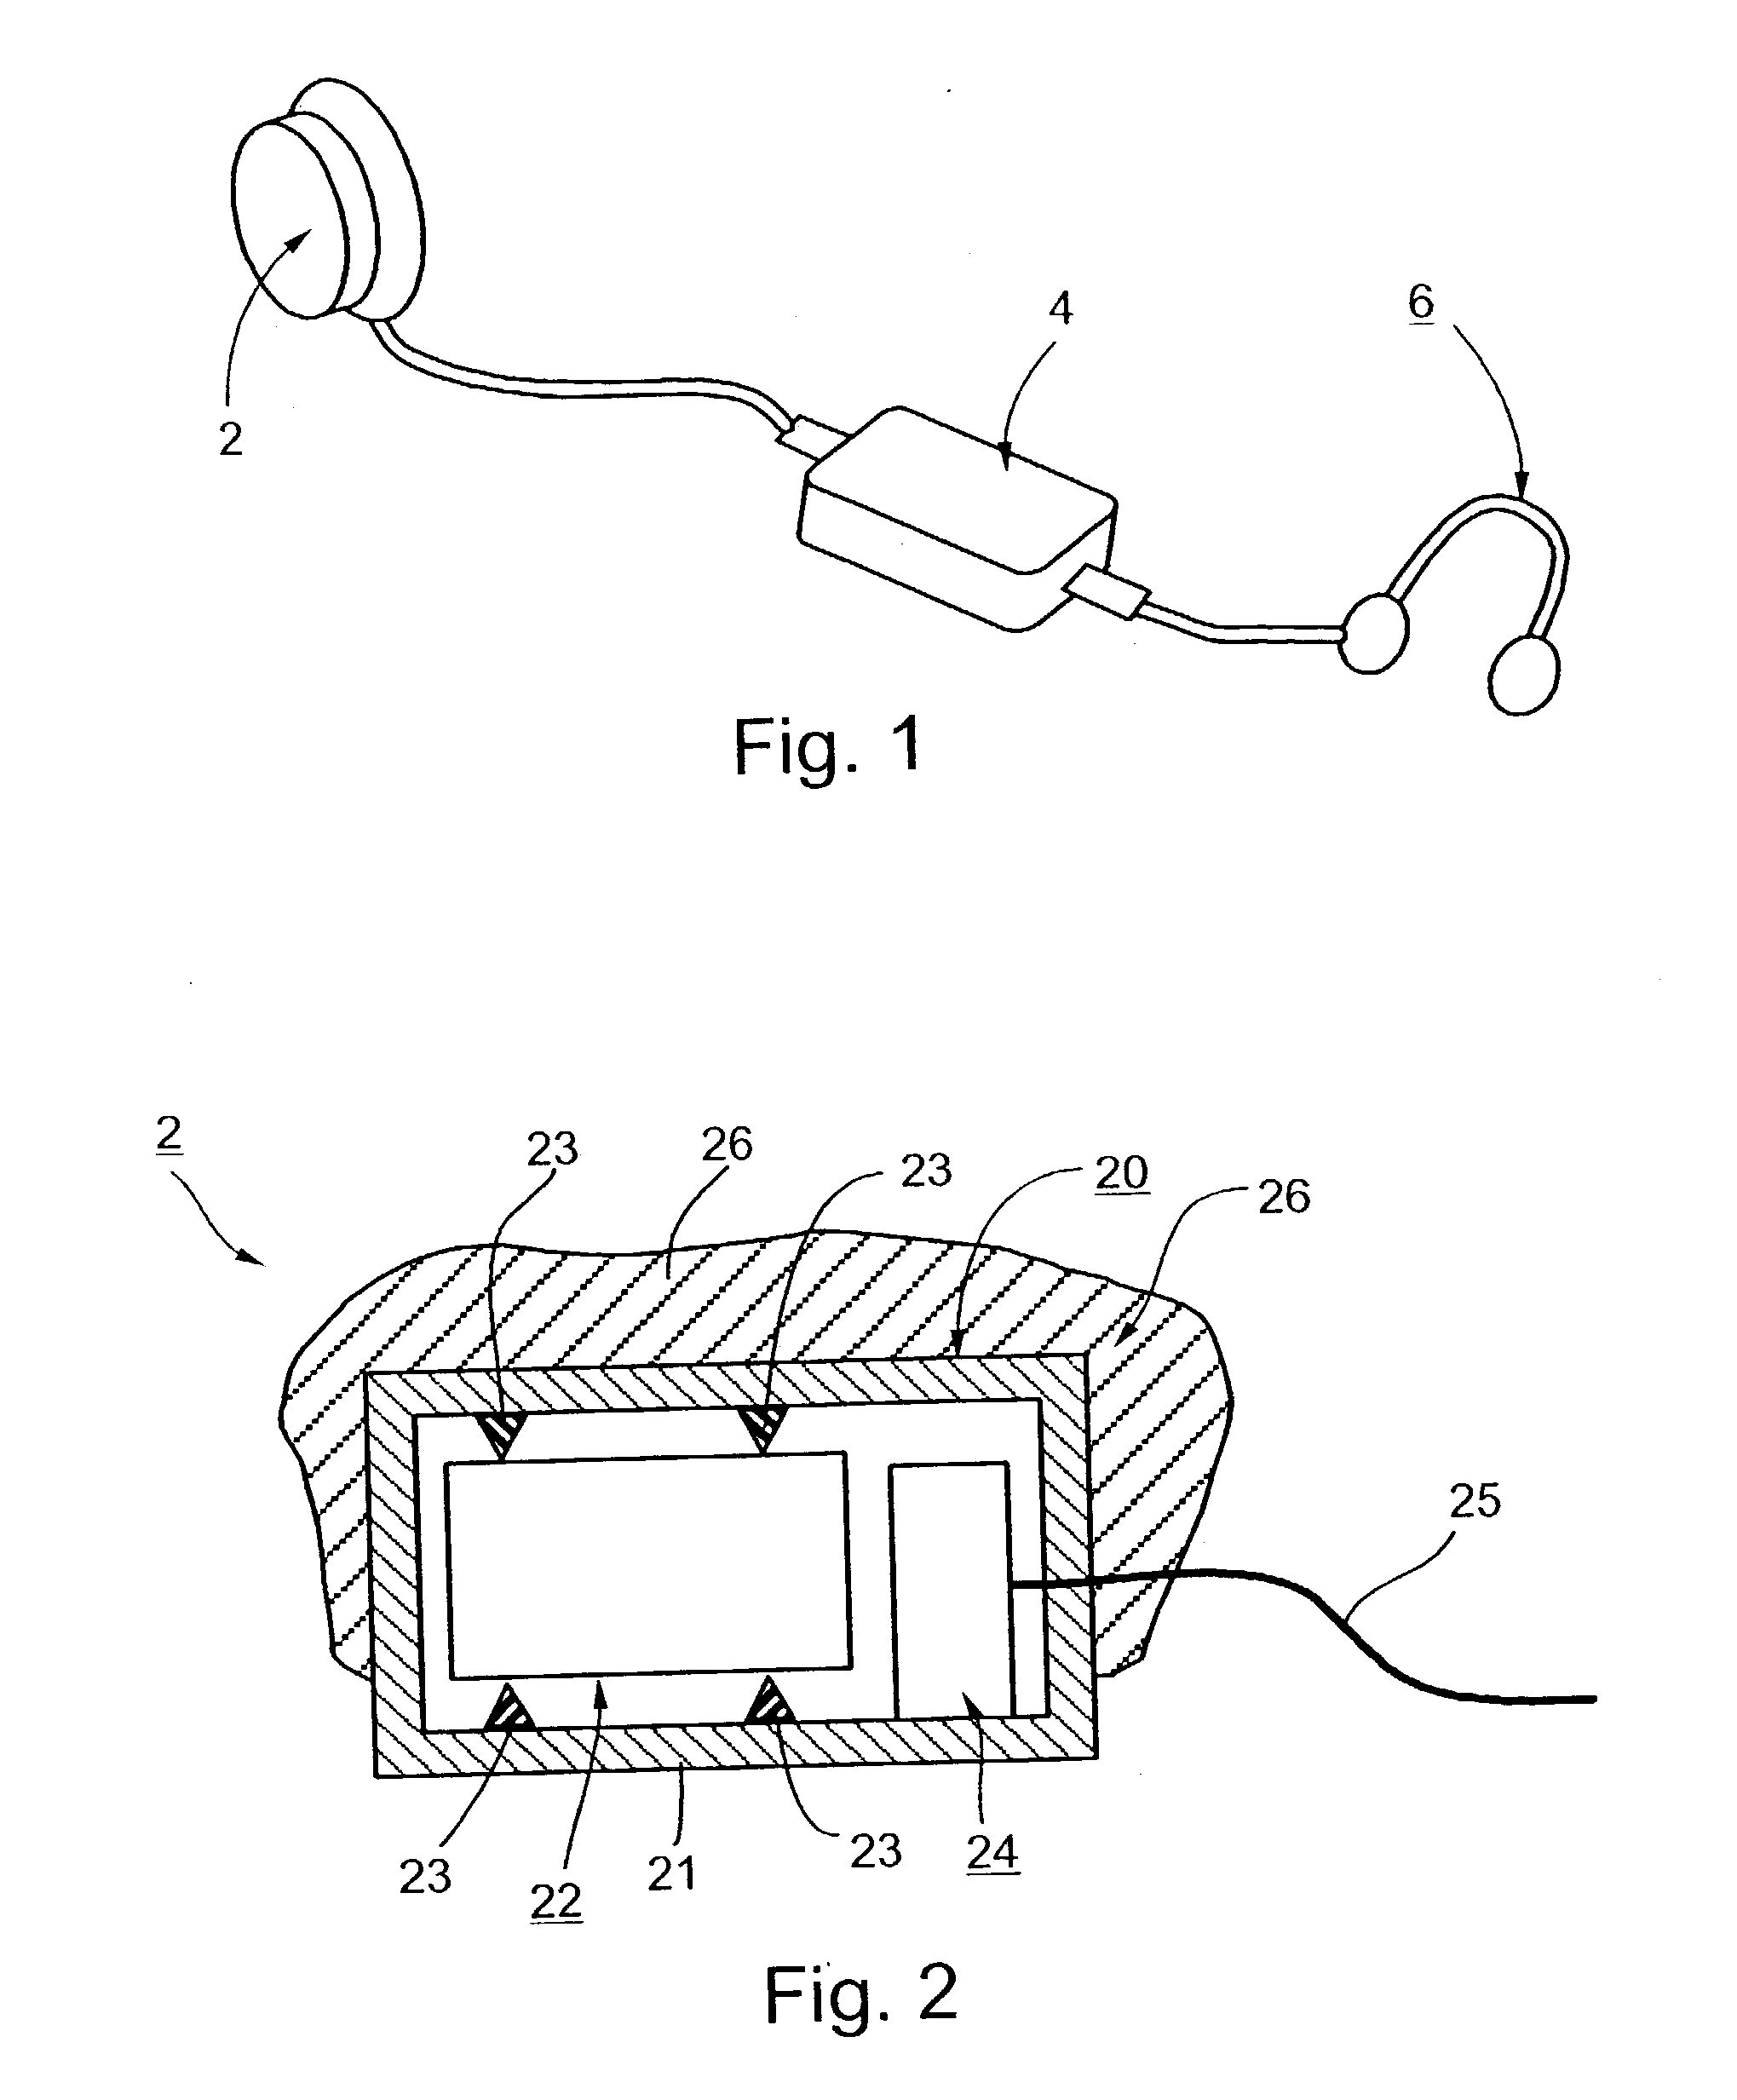 Chest piece for stethoscopes, and methods of utilizing stethoscopes for monitoring the physiological conditions of a patient